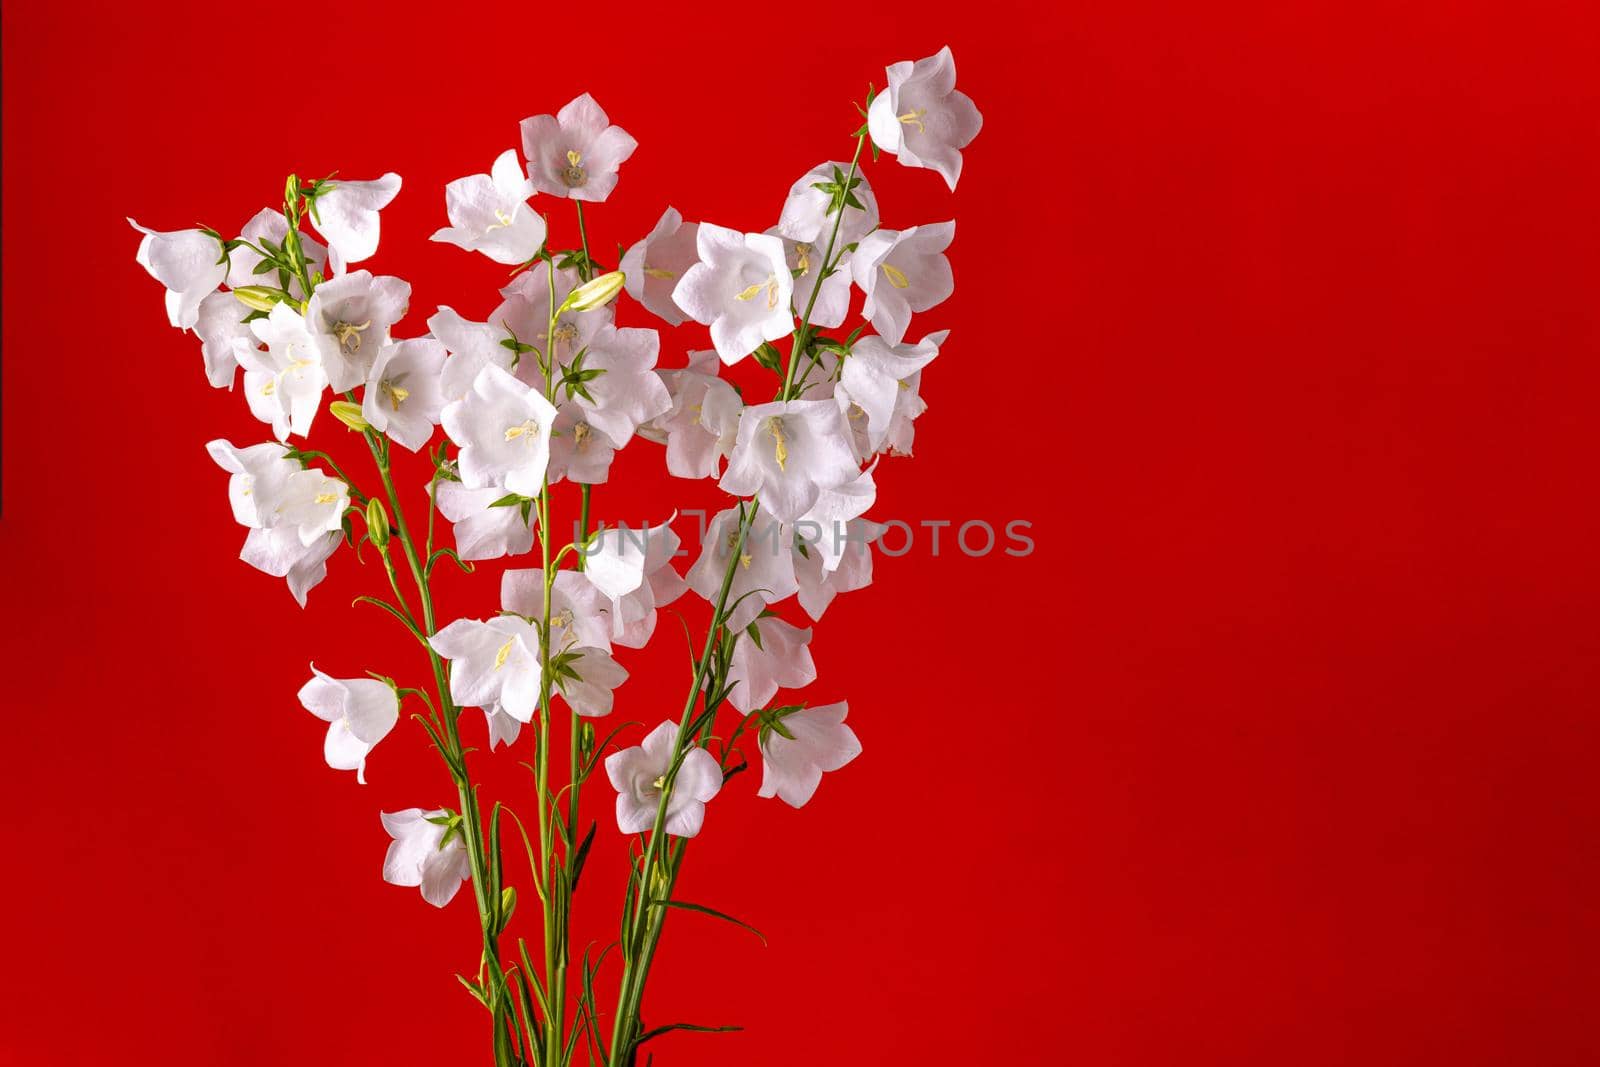 A bouquet of flowers bells on a red background by Madhourse